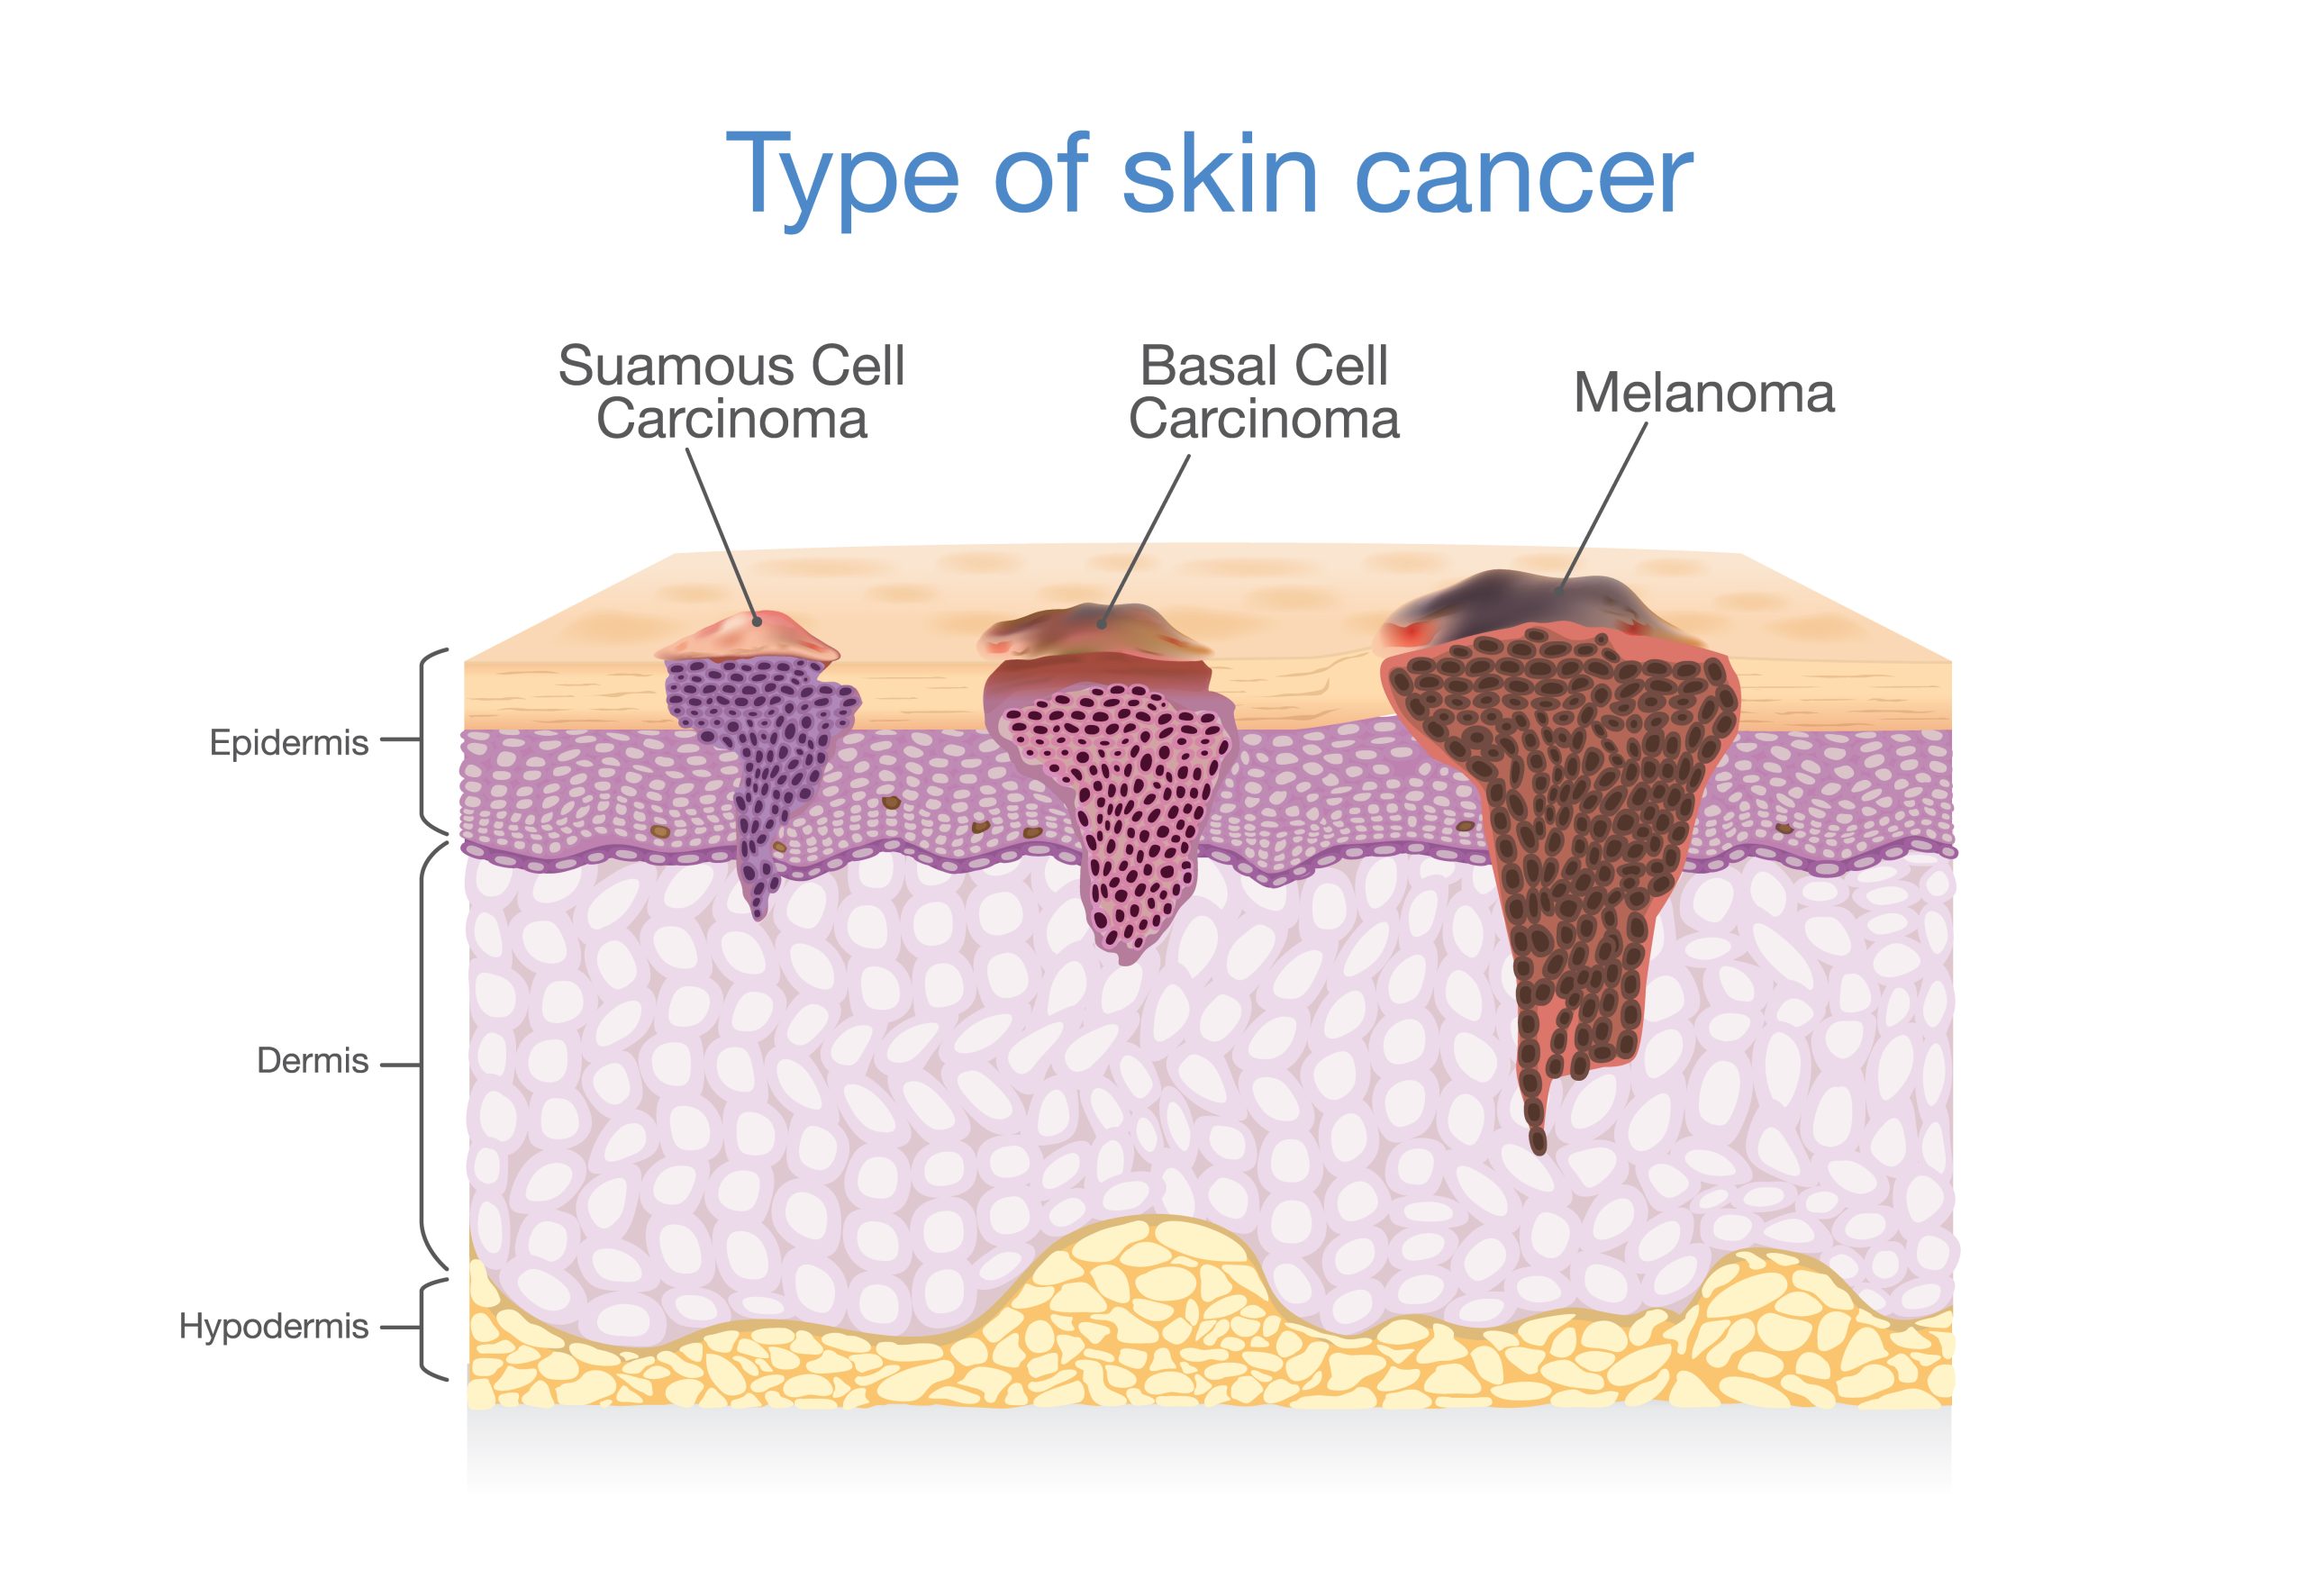 Types of skin cancer infographic